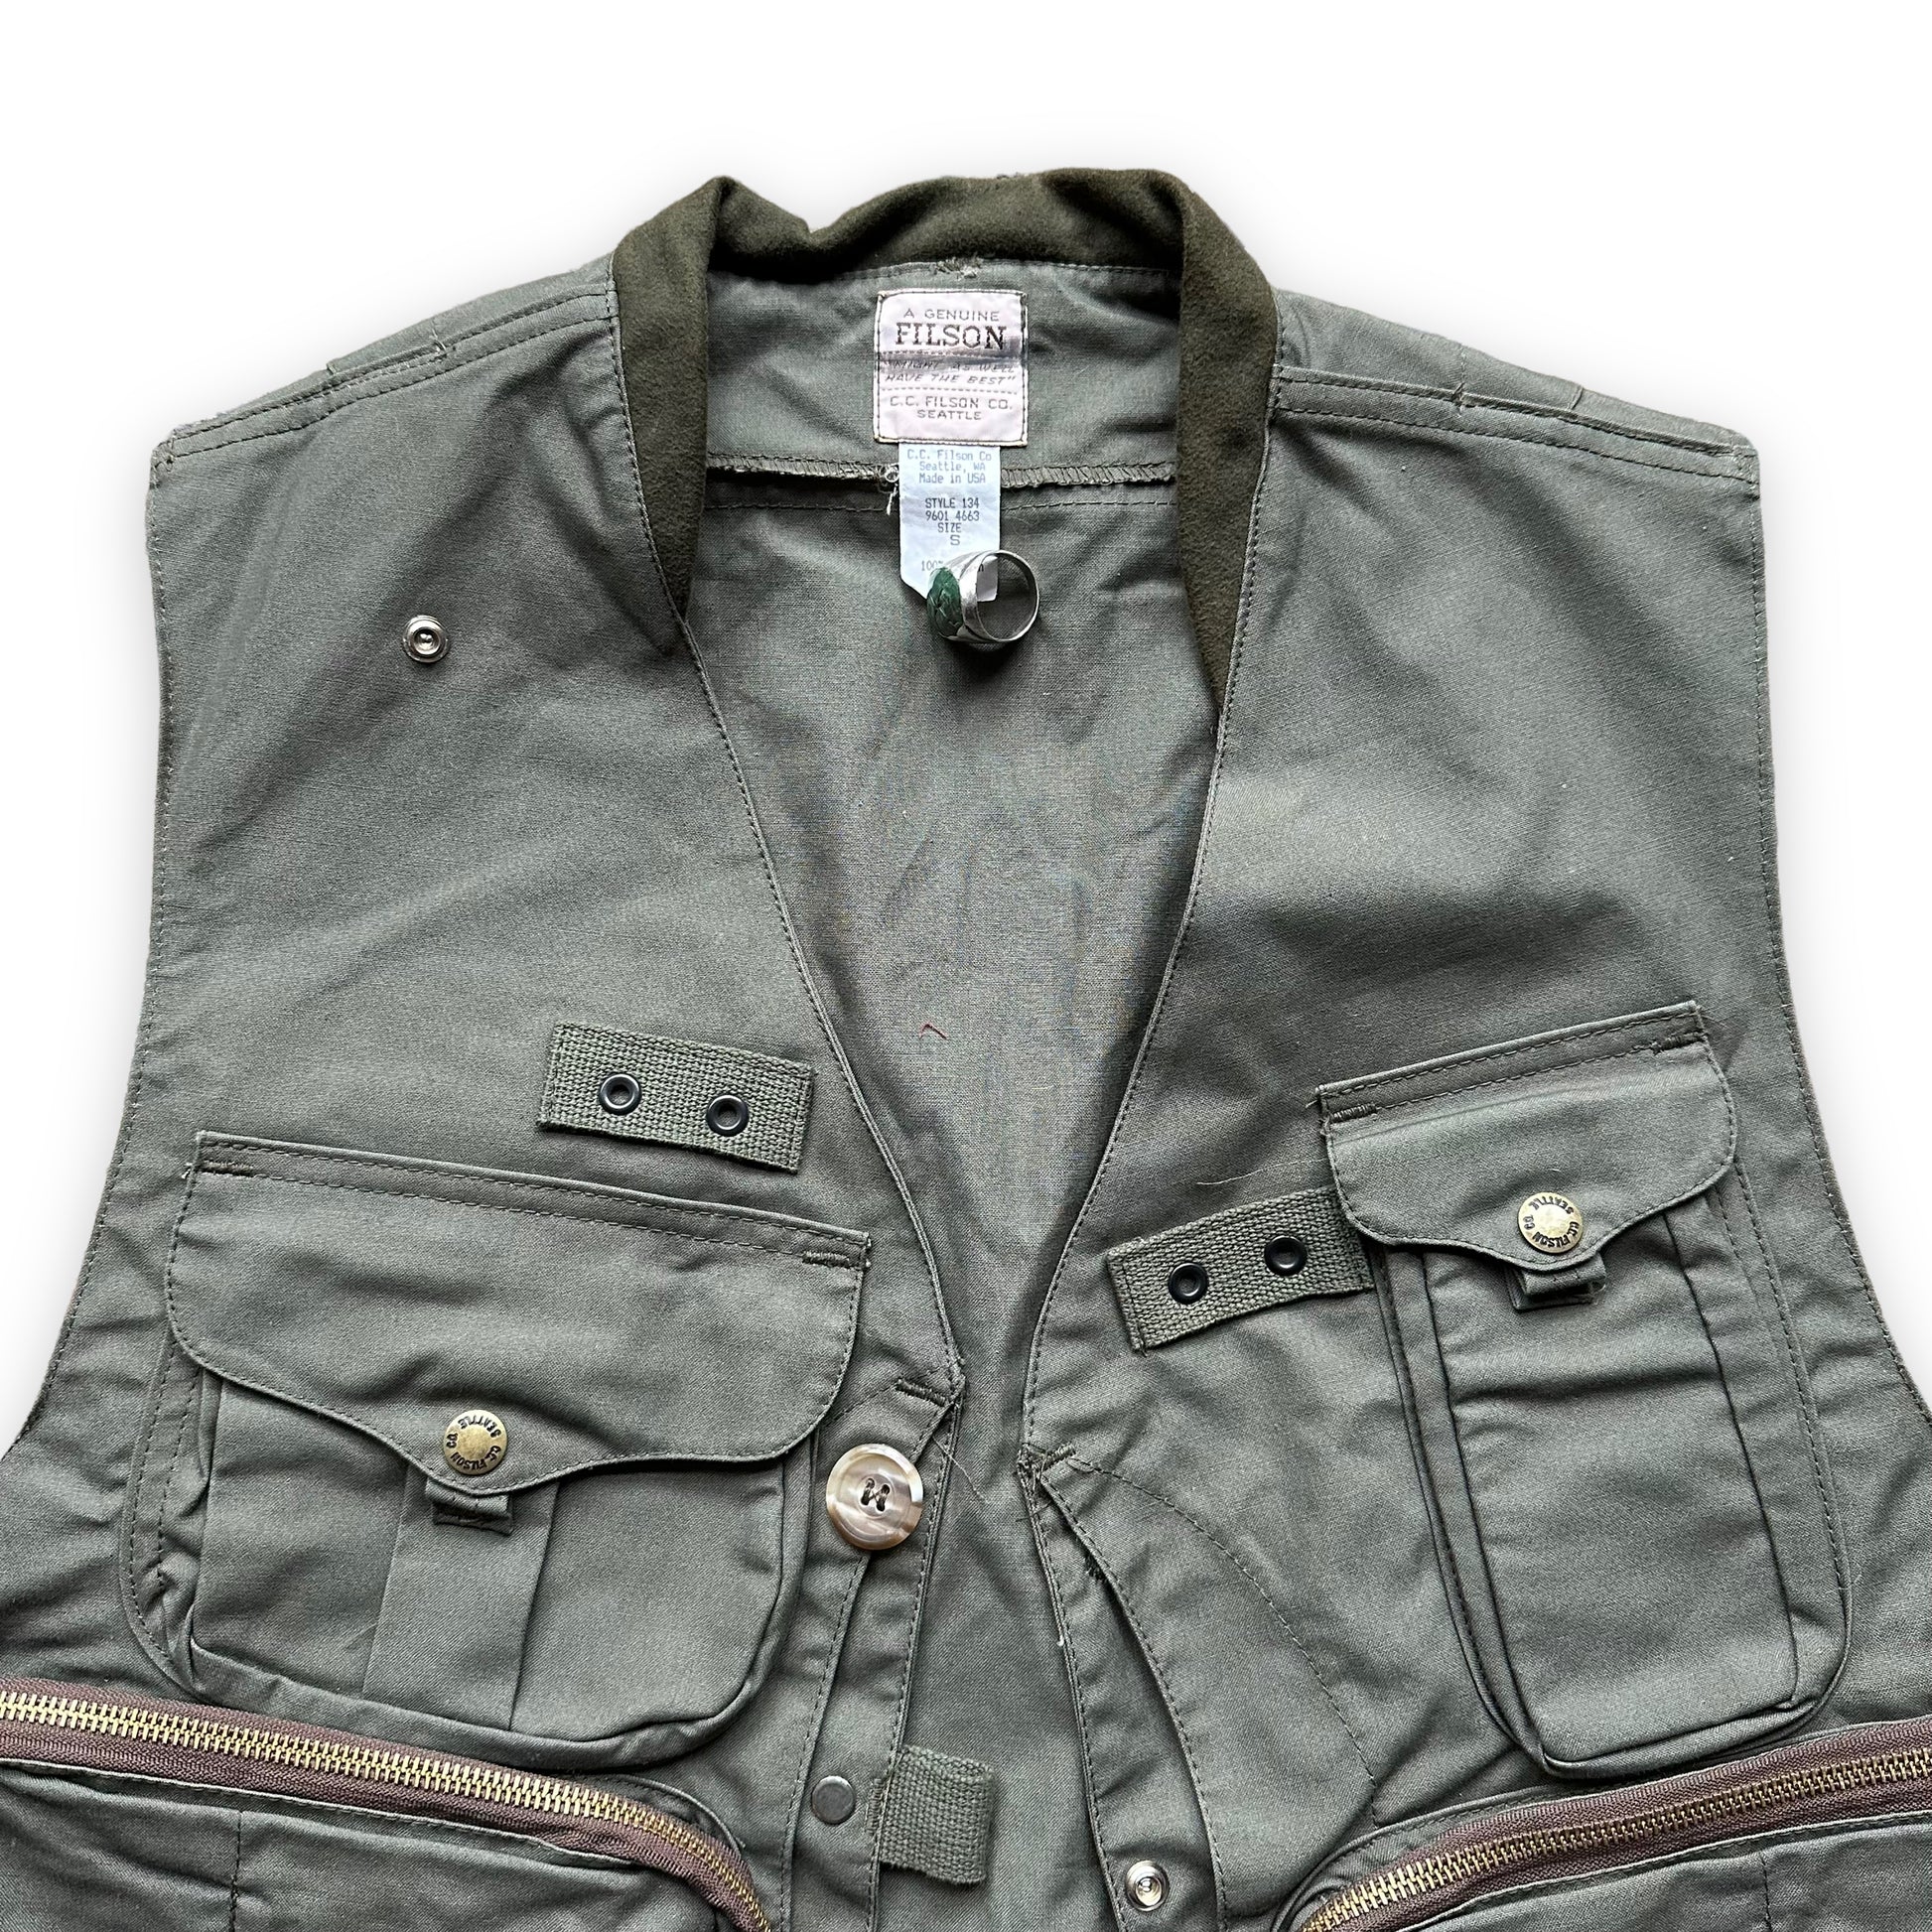 Upper Front View of Vintage Filson Fly Fishing Vest Style 134 SZ S |  Filson Tin Cloth Vests Seattle | Barn Owl Vintage